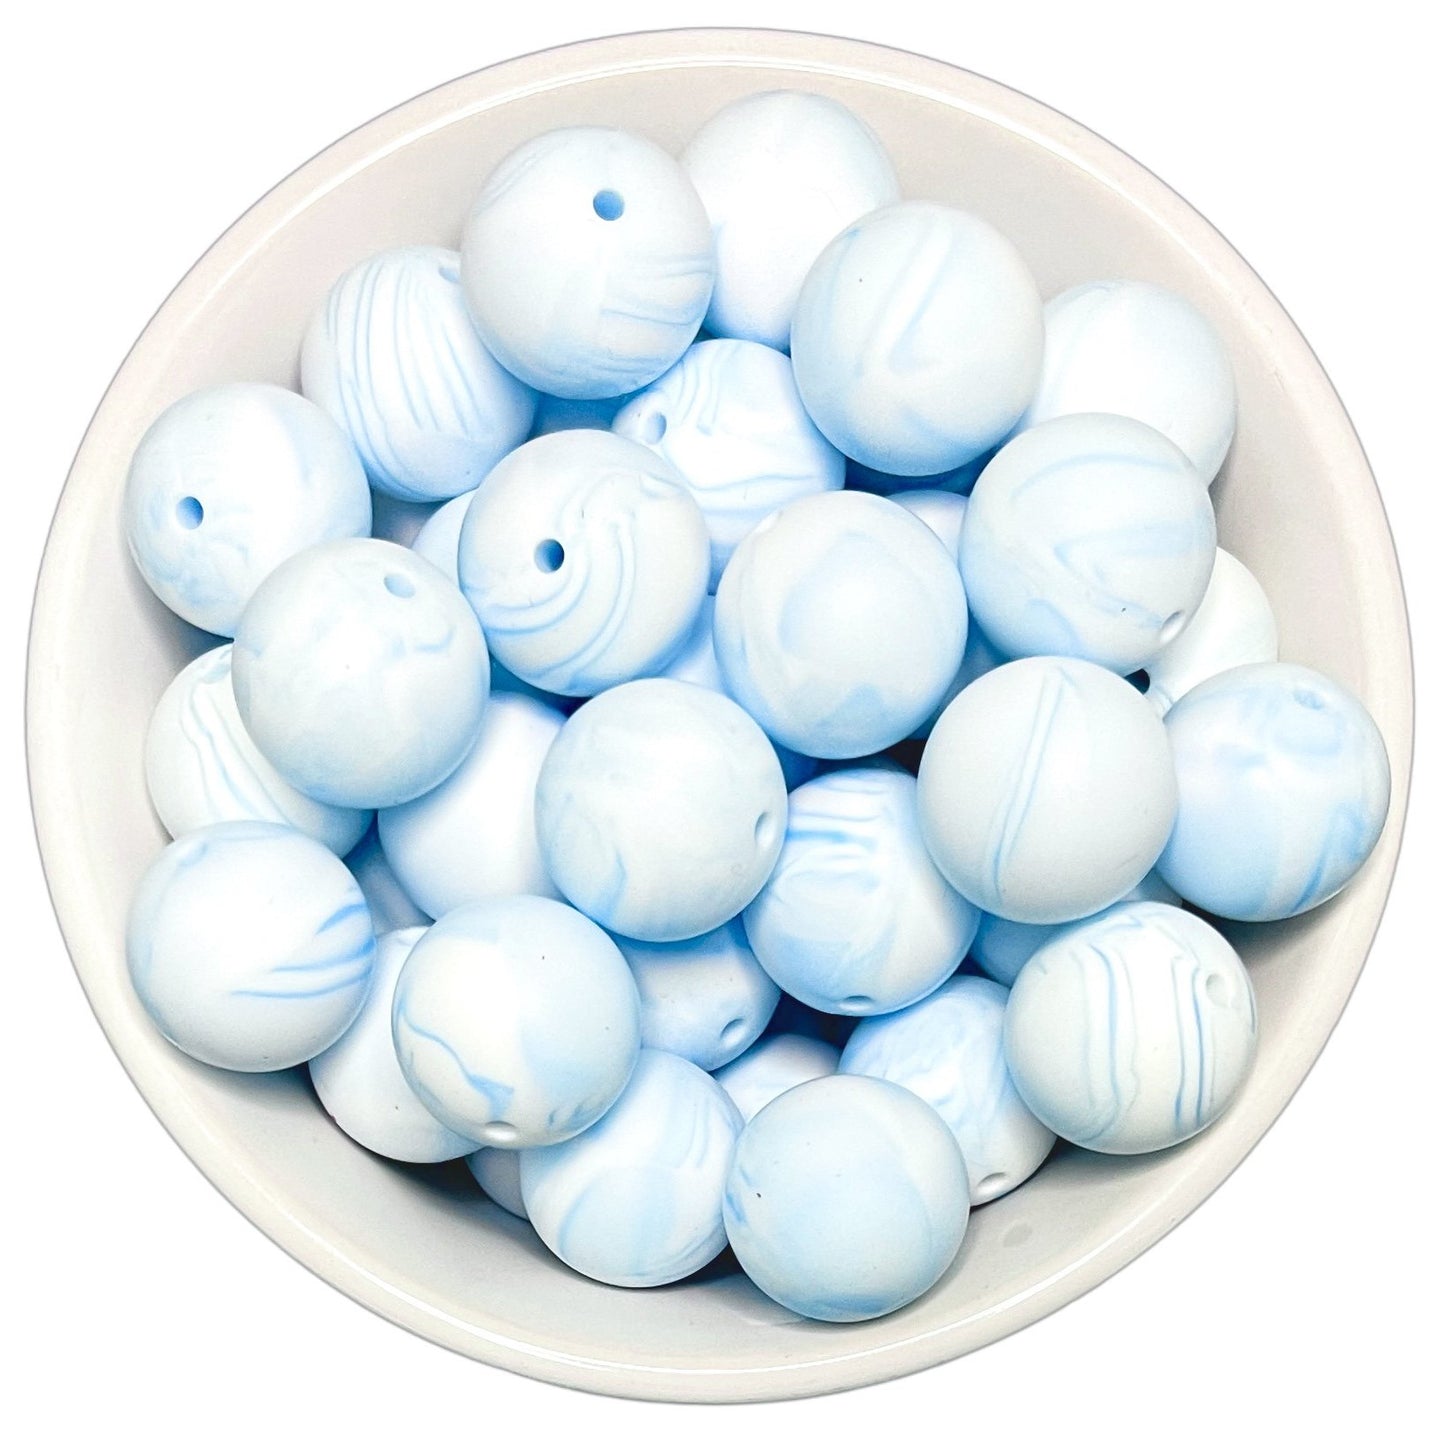 Bright Blue Marble 15mm Silicone Beads - 10 pk.